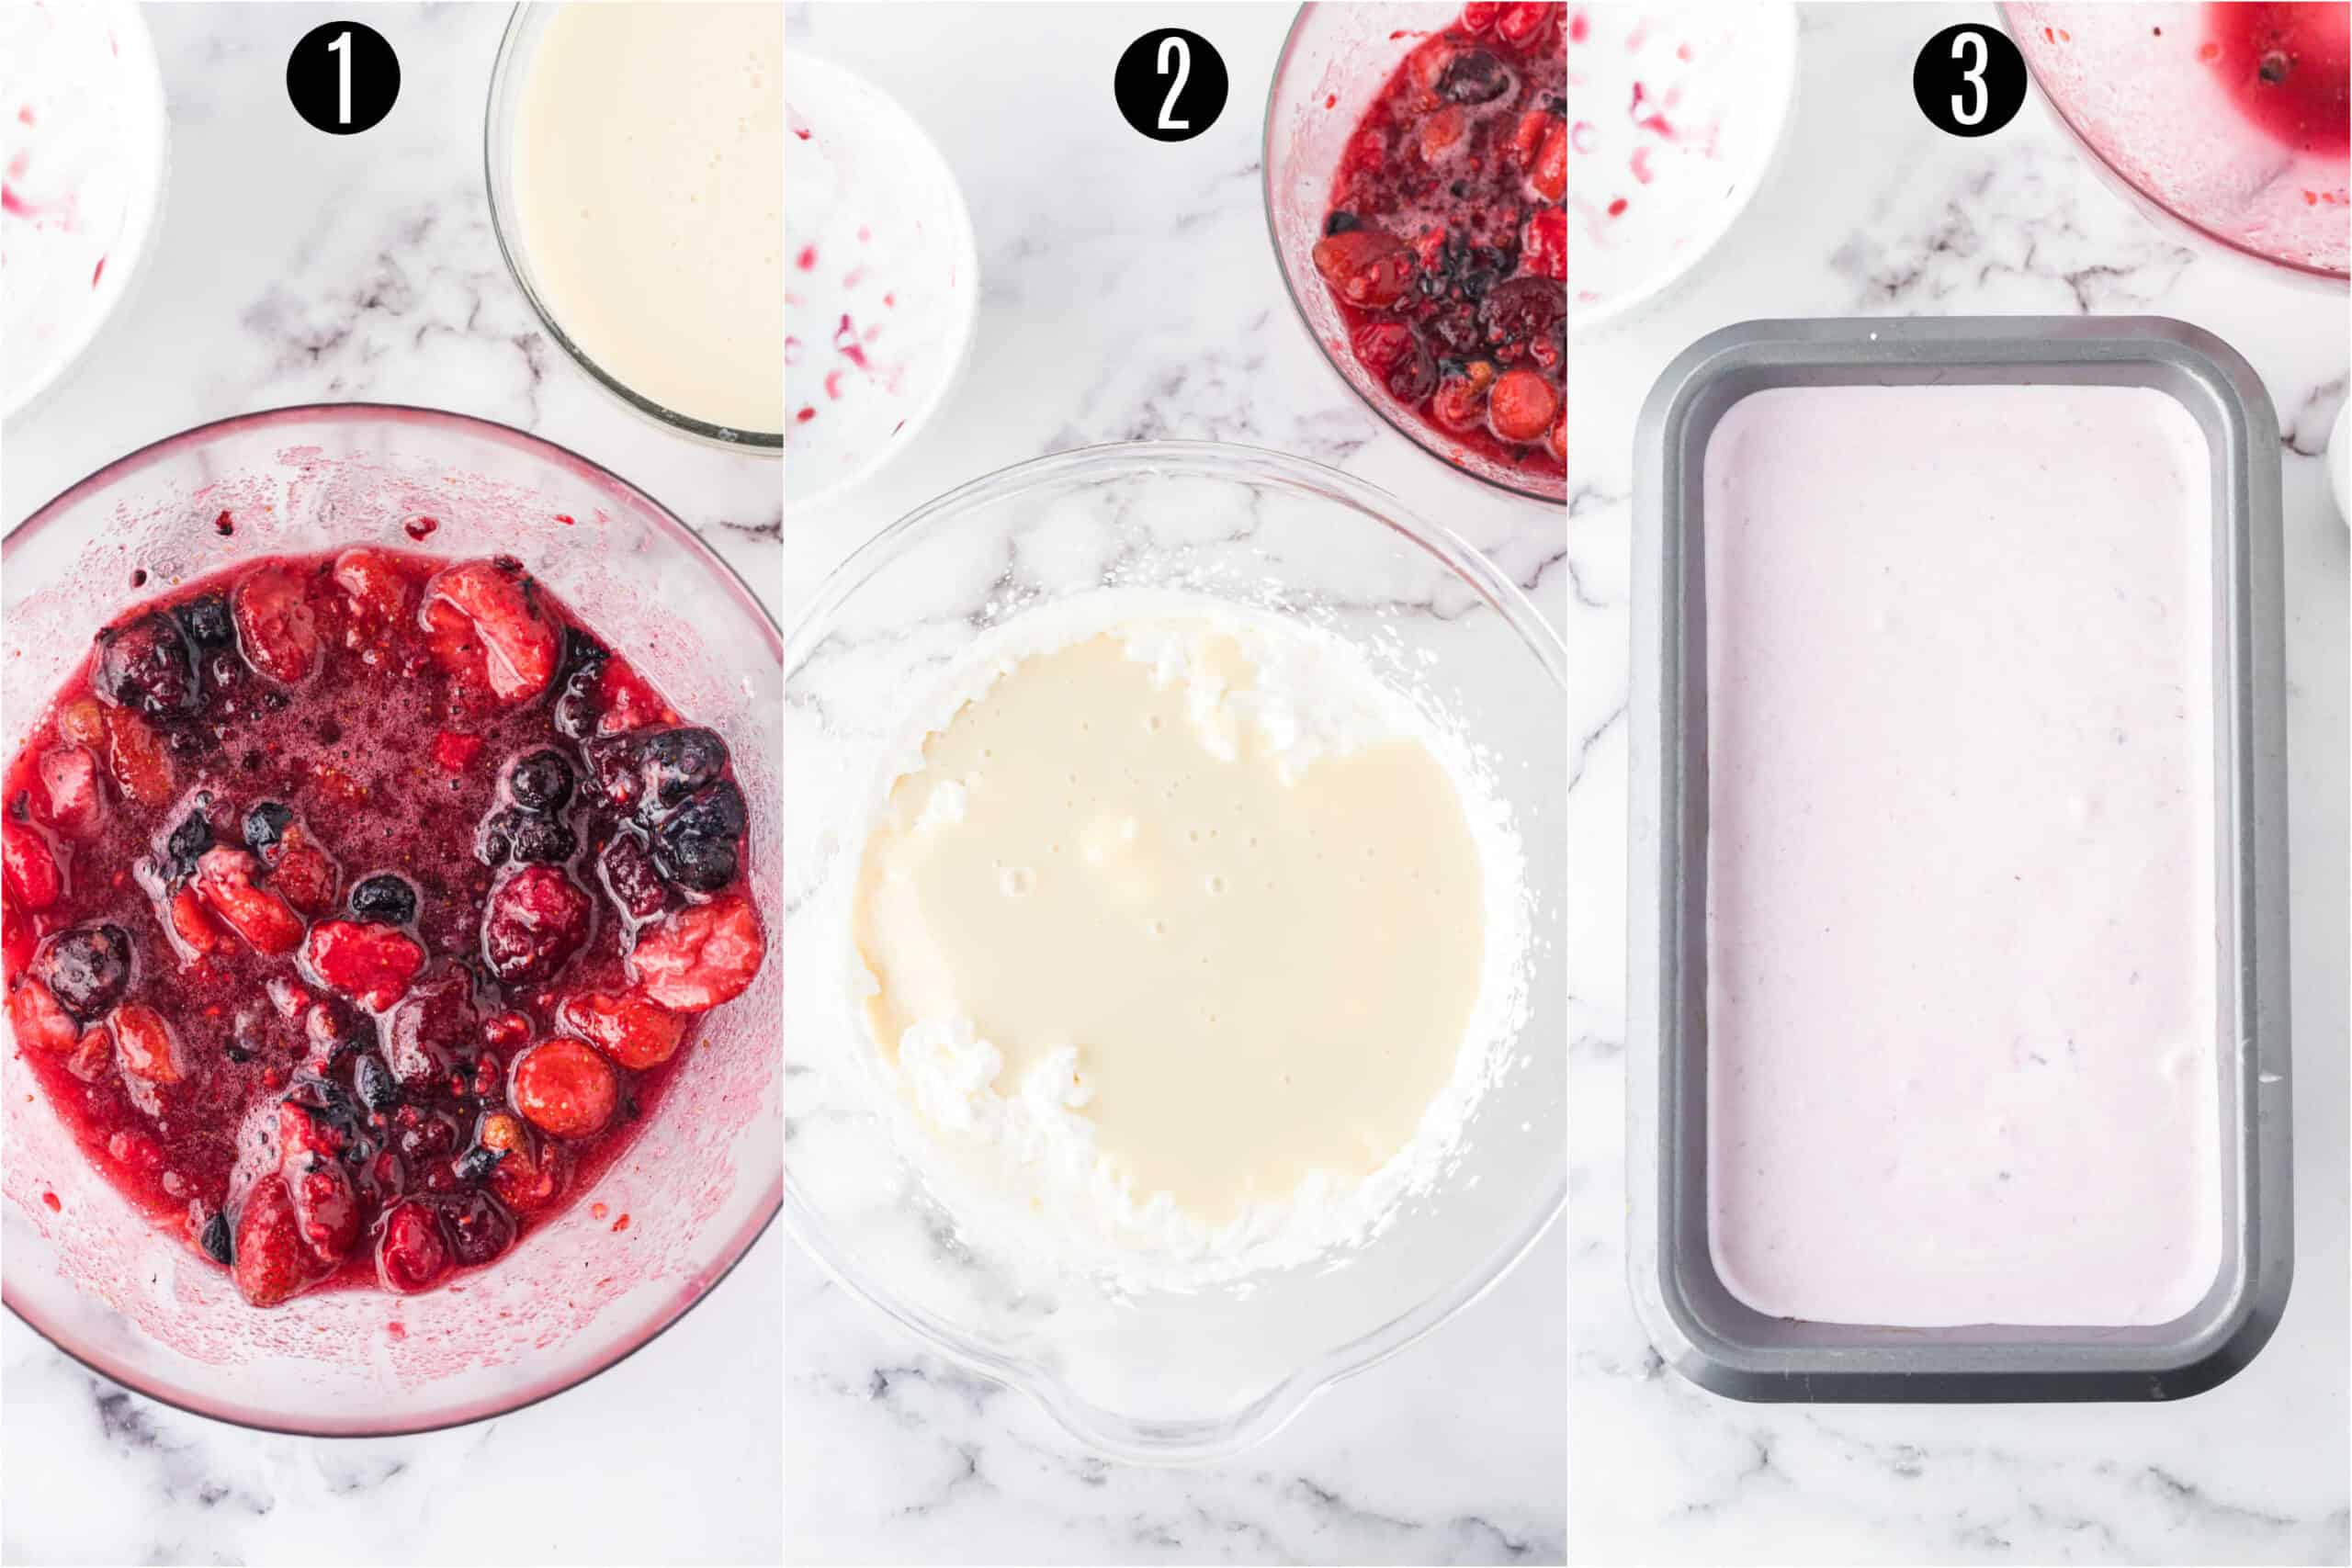 Step by step photos showing how to make berry ice cream.